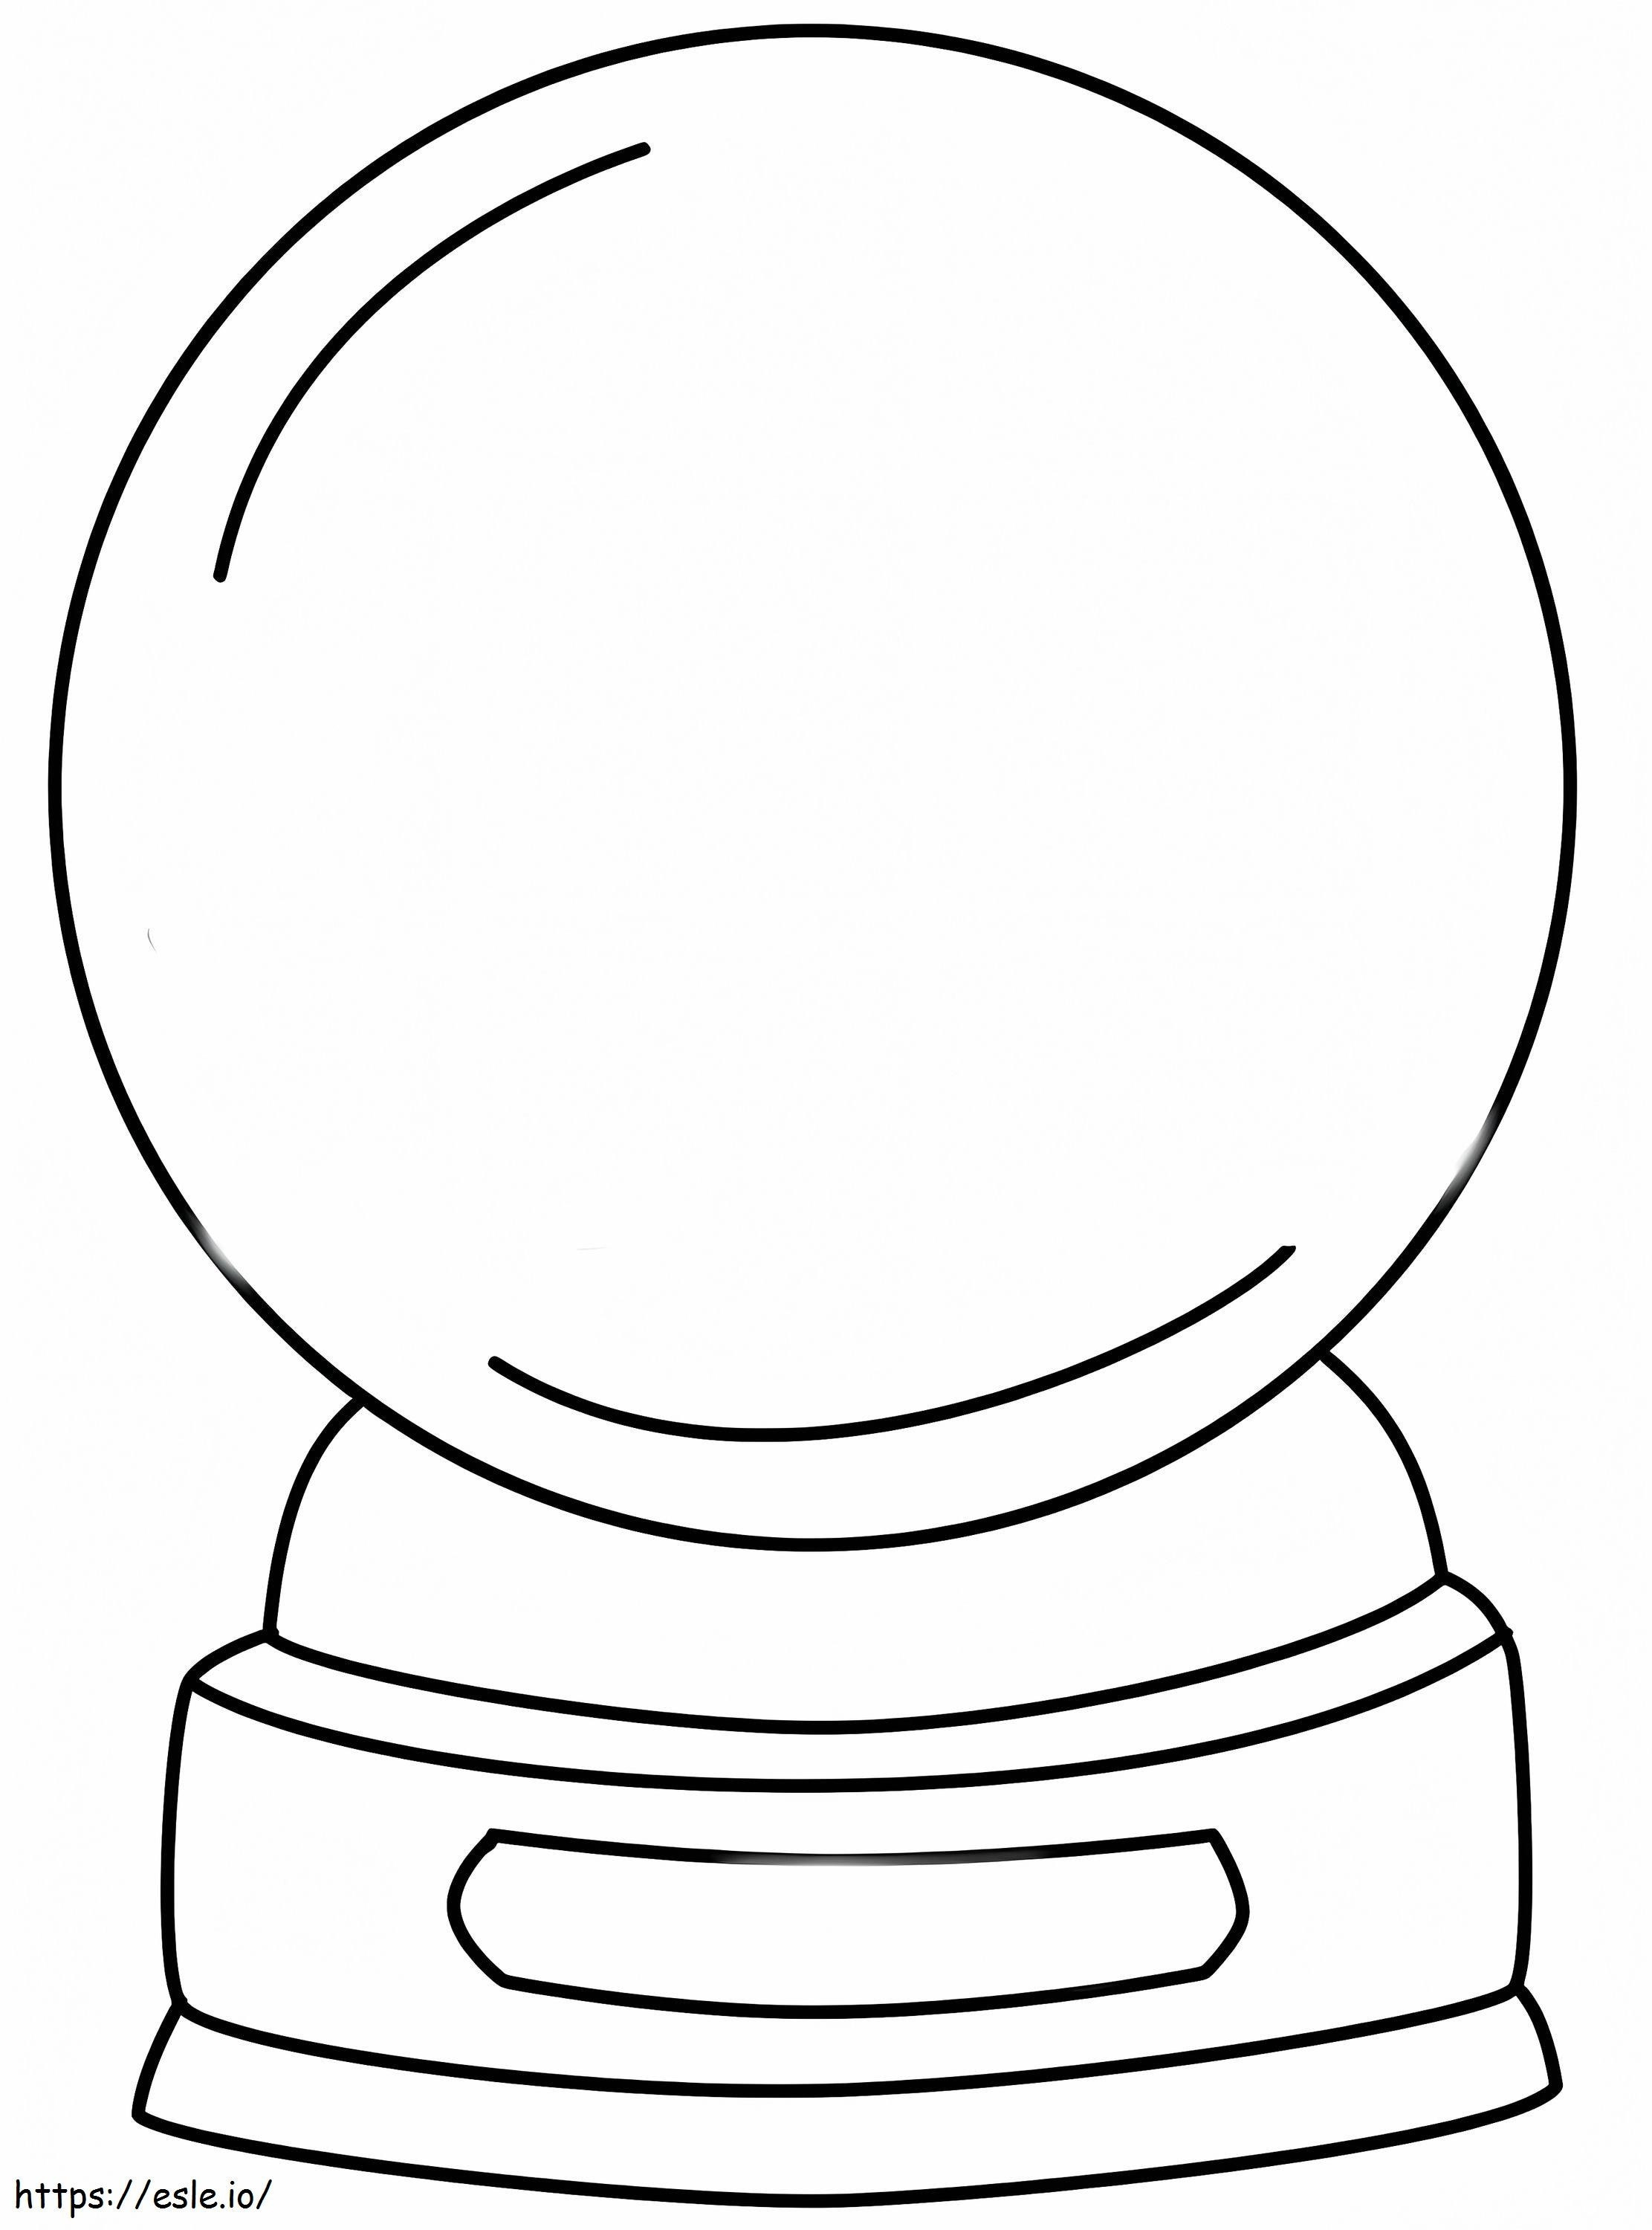 Very Easy Snow Globe coloring page